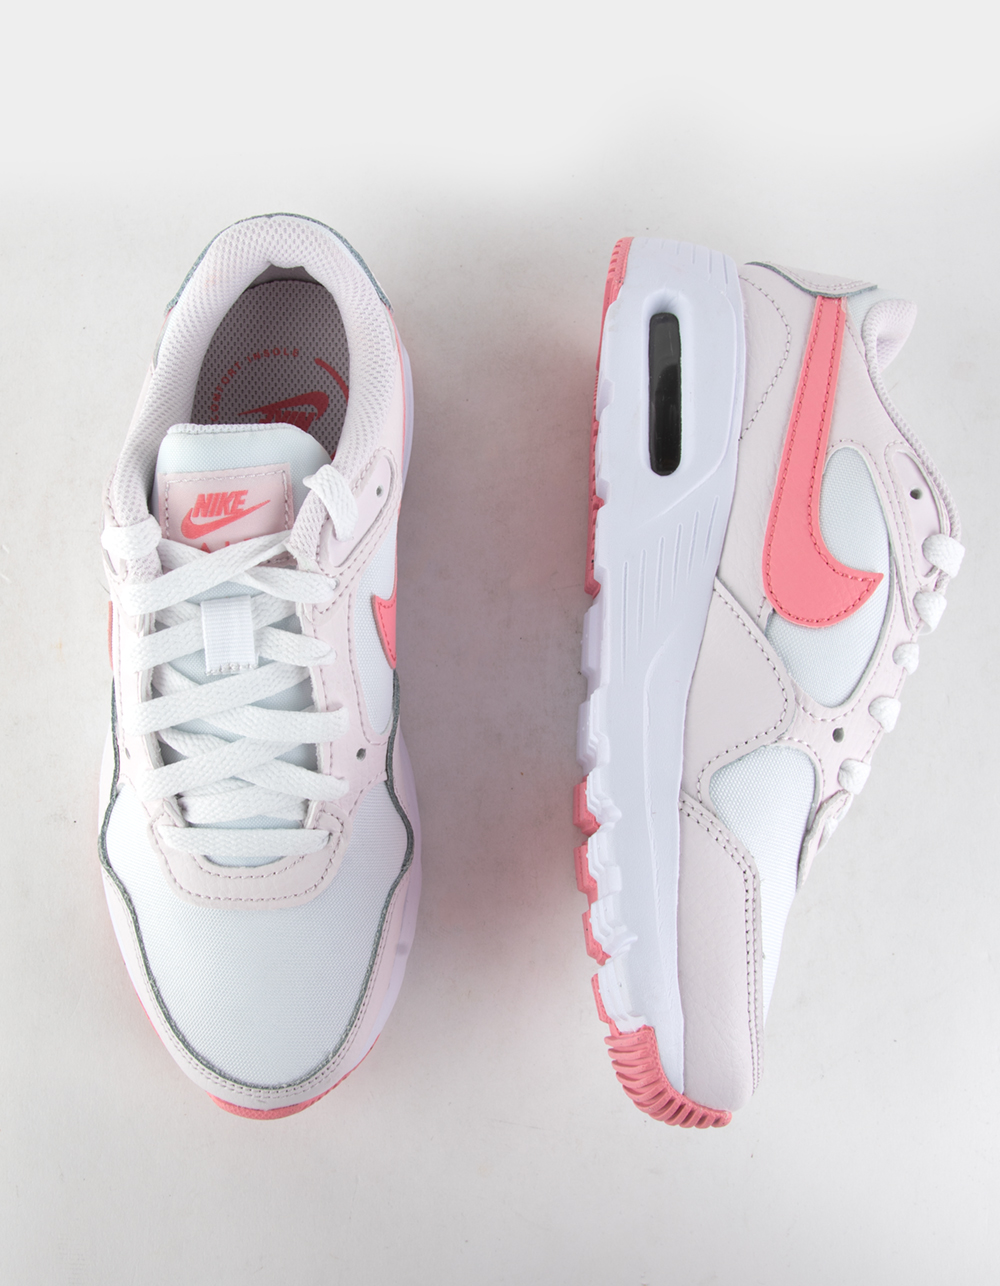 NIKE Air Max SC Womens Shoes - WHT/PNK | Tillys